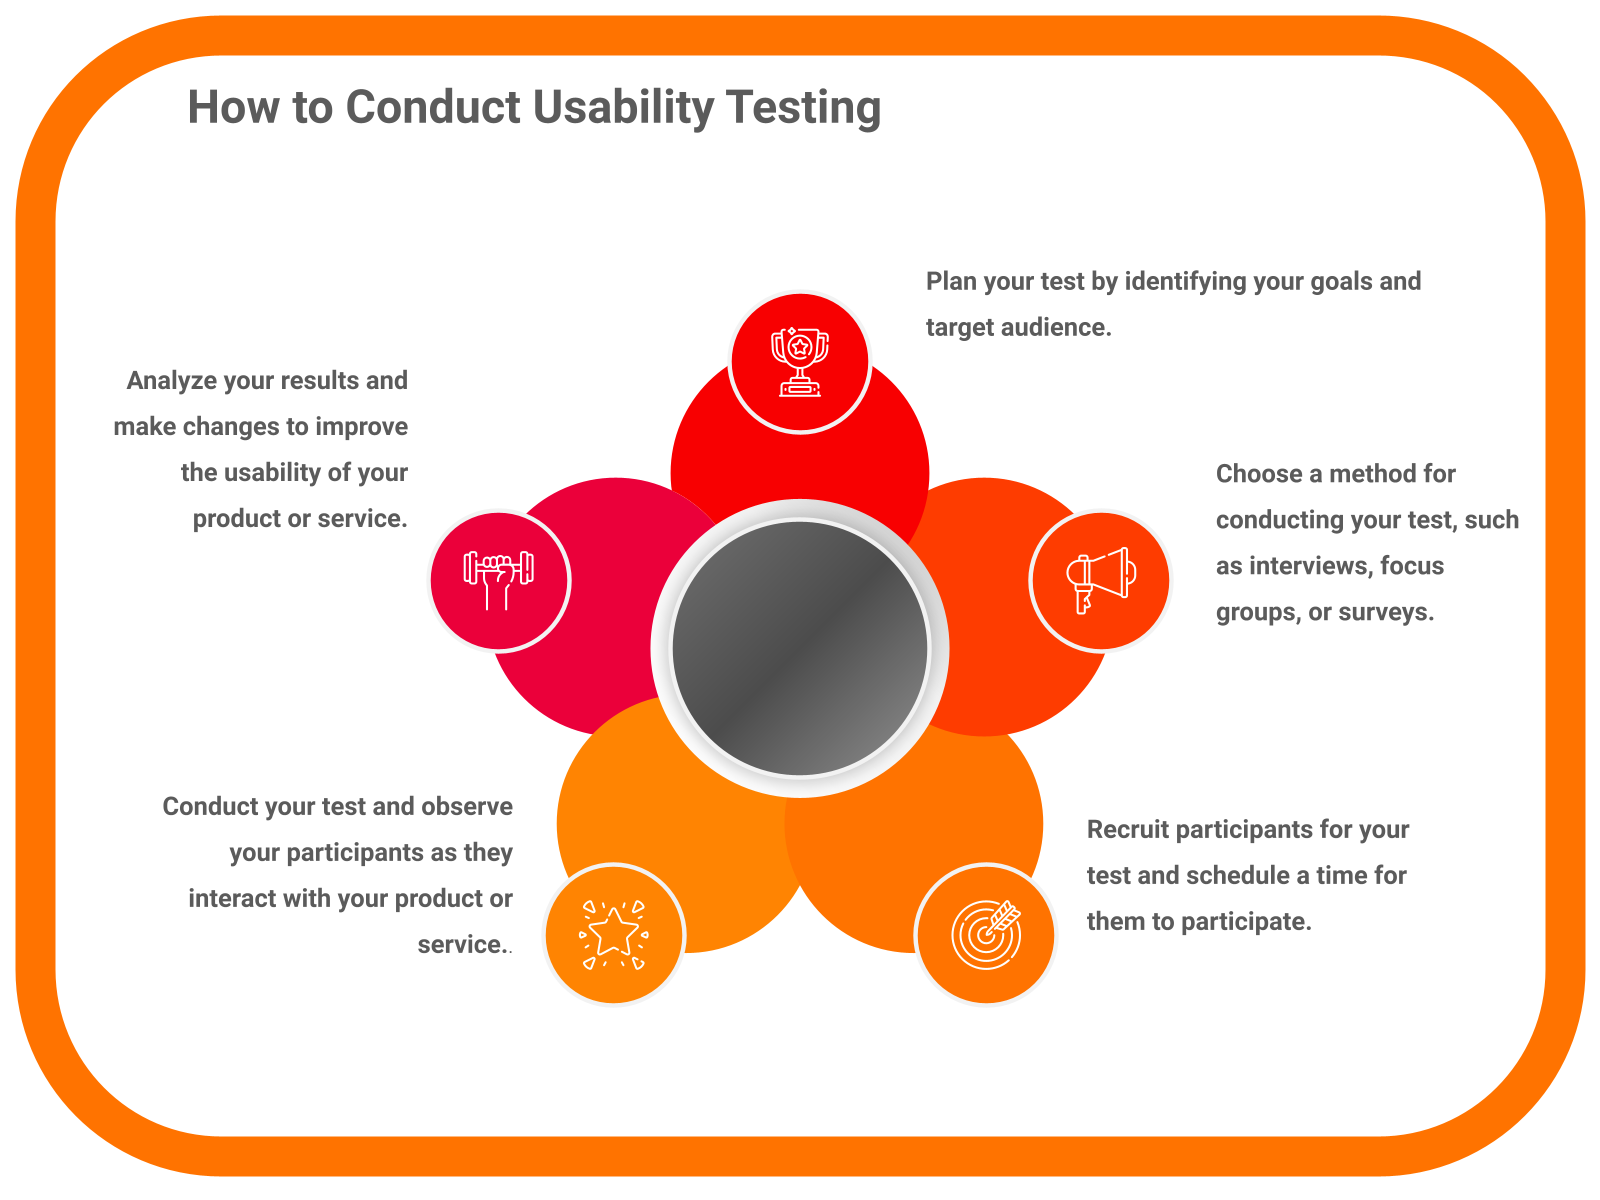 How to Conduct Usability Testing